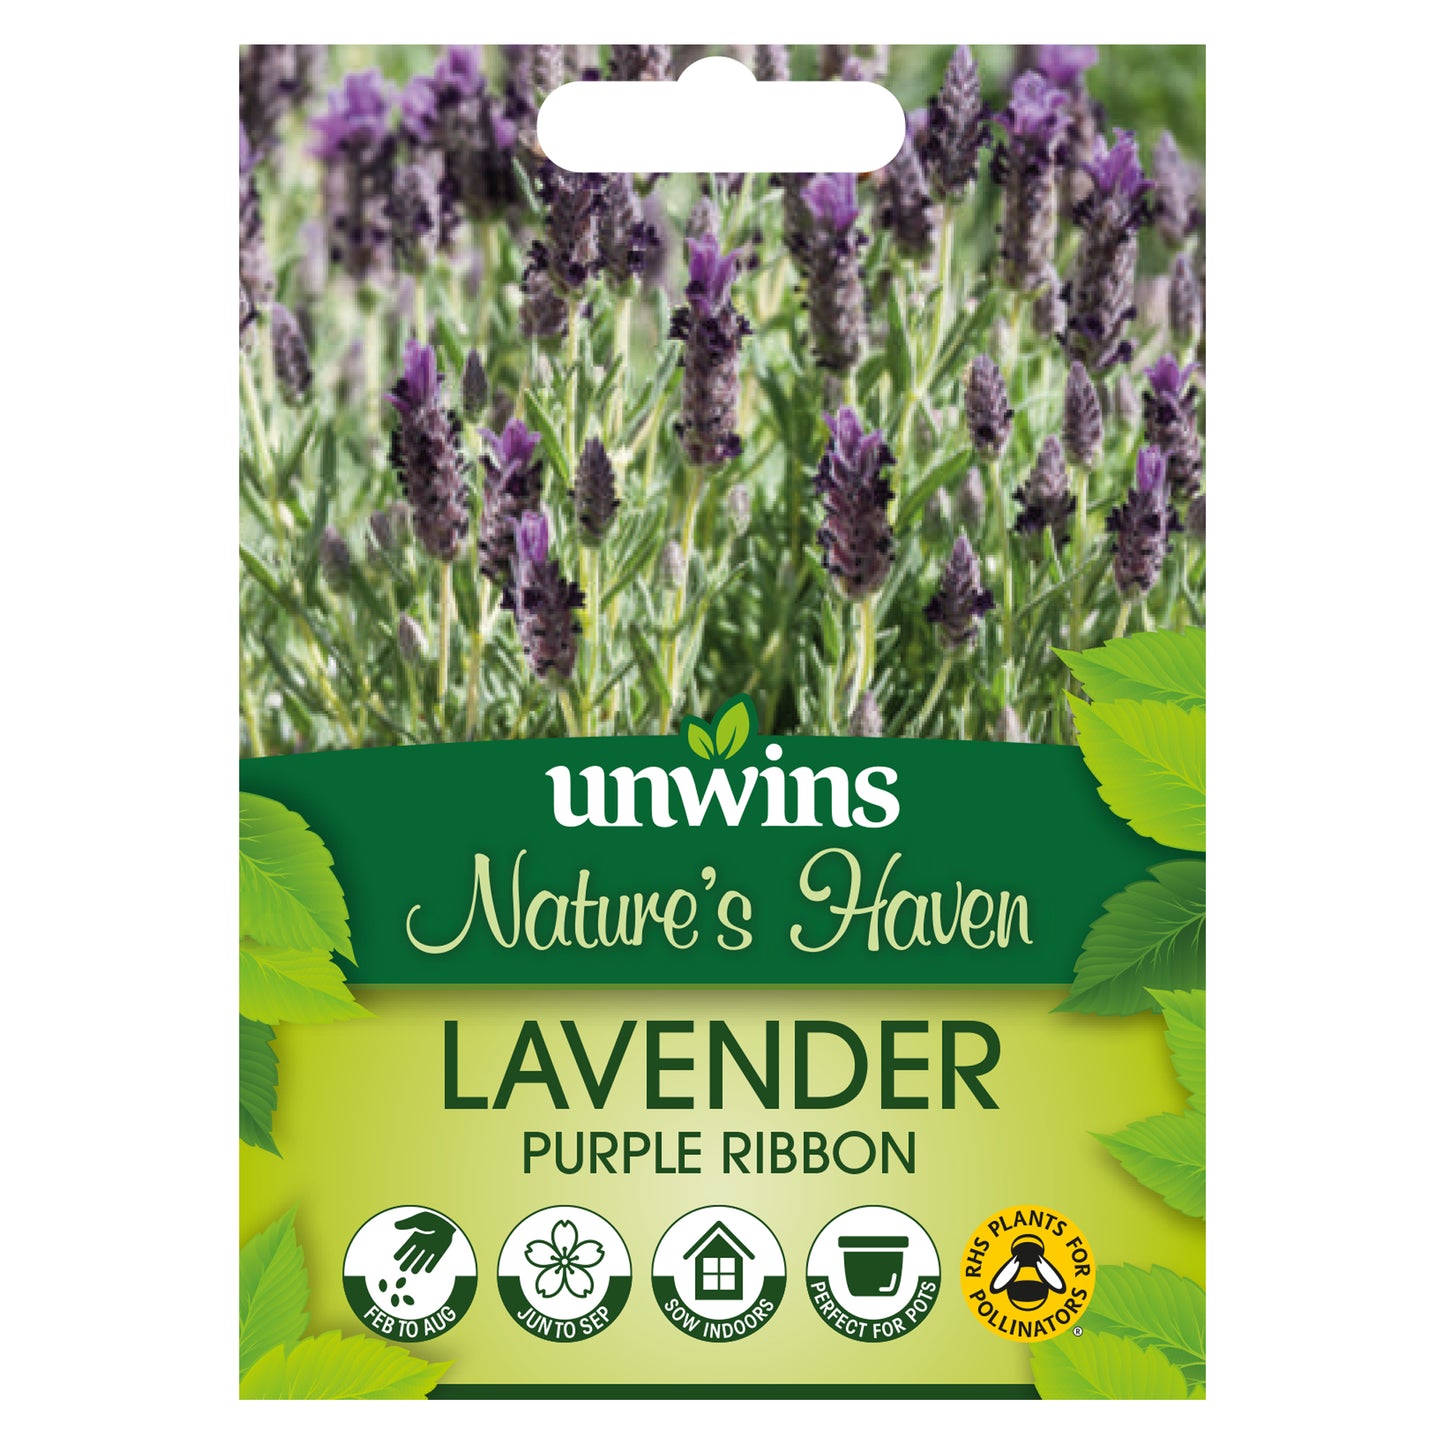 Nature's Haven Lavender Purple Ribbon Seeds front of pack